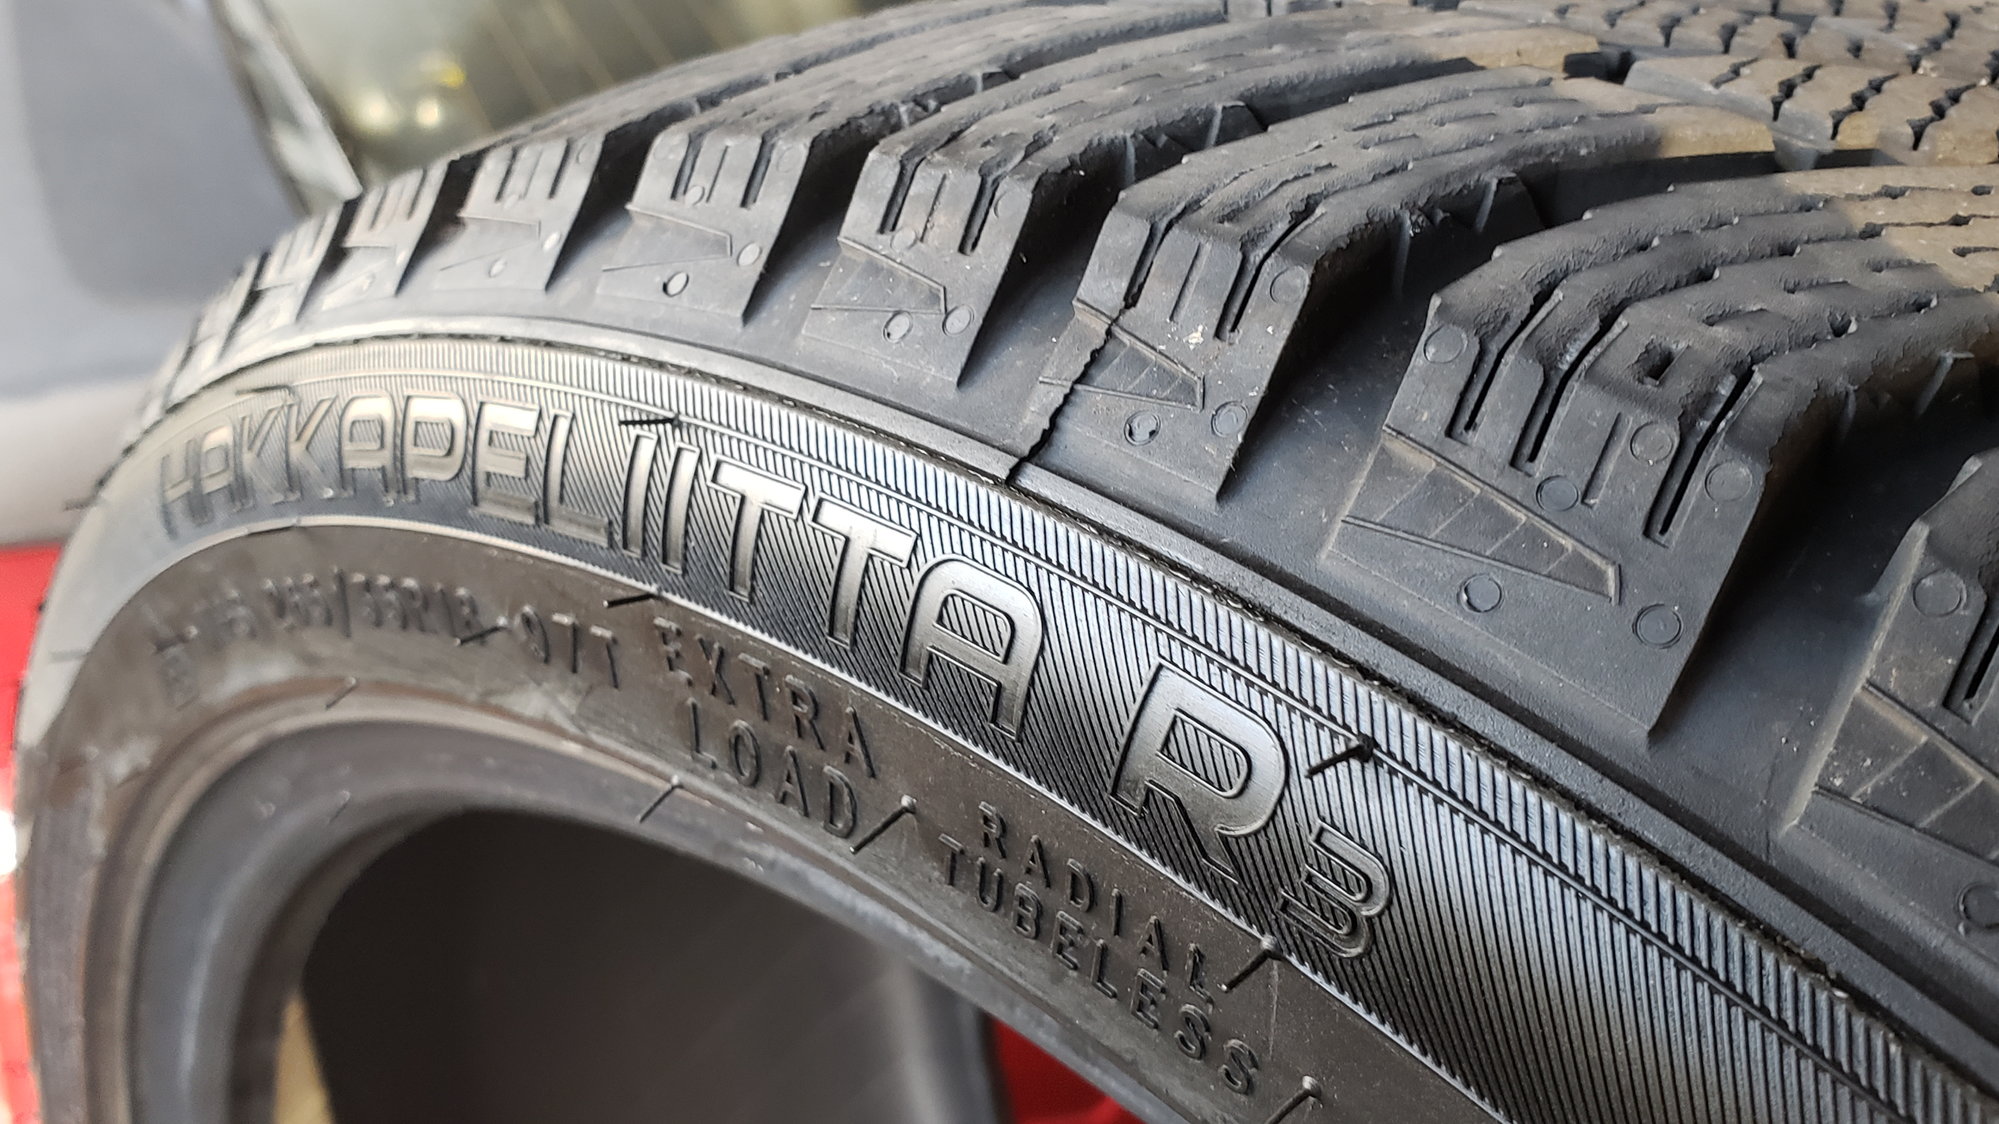 Wheels and Tires/Axles - E55 Snow Tires - Like New - Used - 2003 to 2009 Mercedes-Benz E55 AMG - Miami, FL 33176, United States